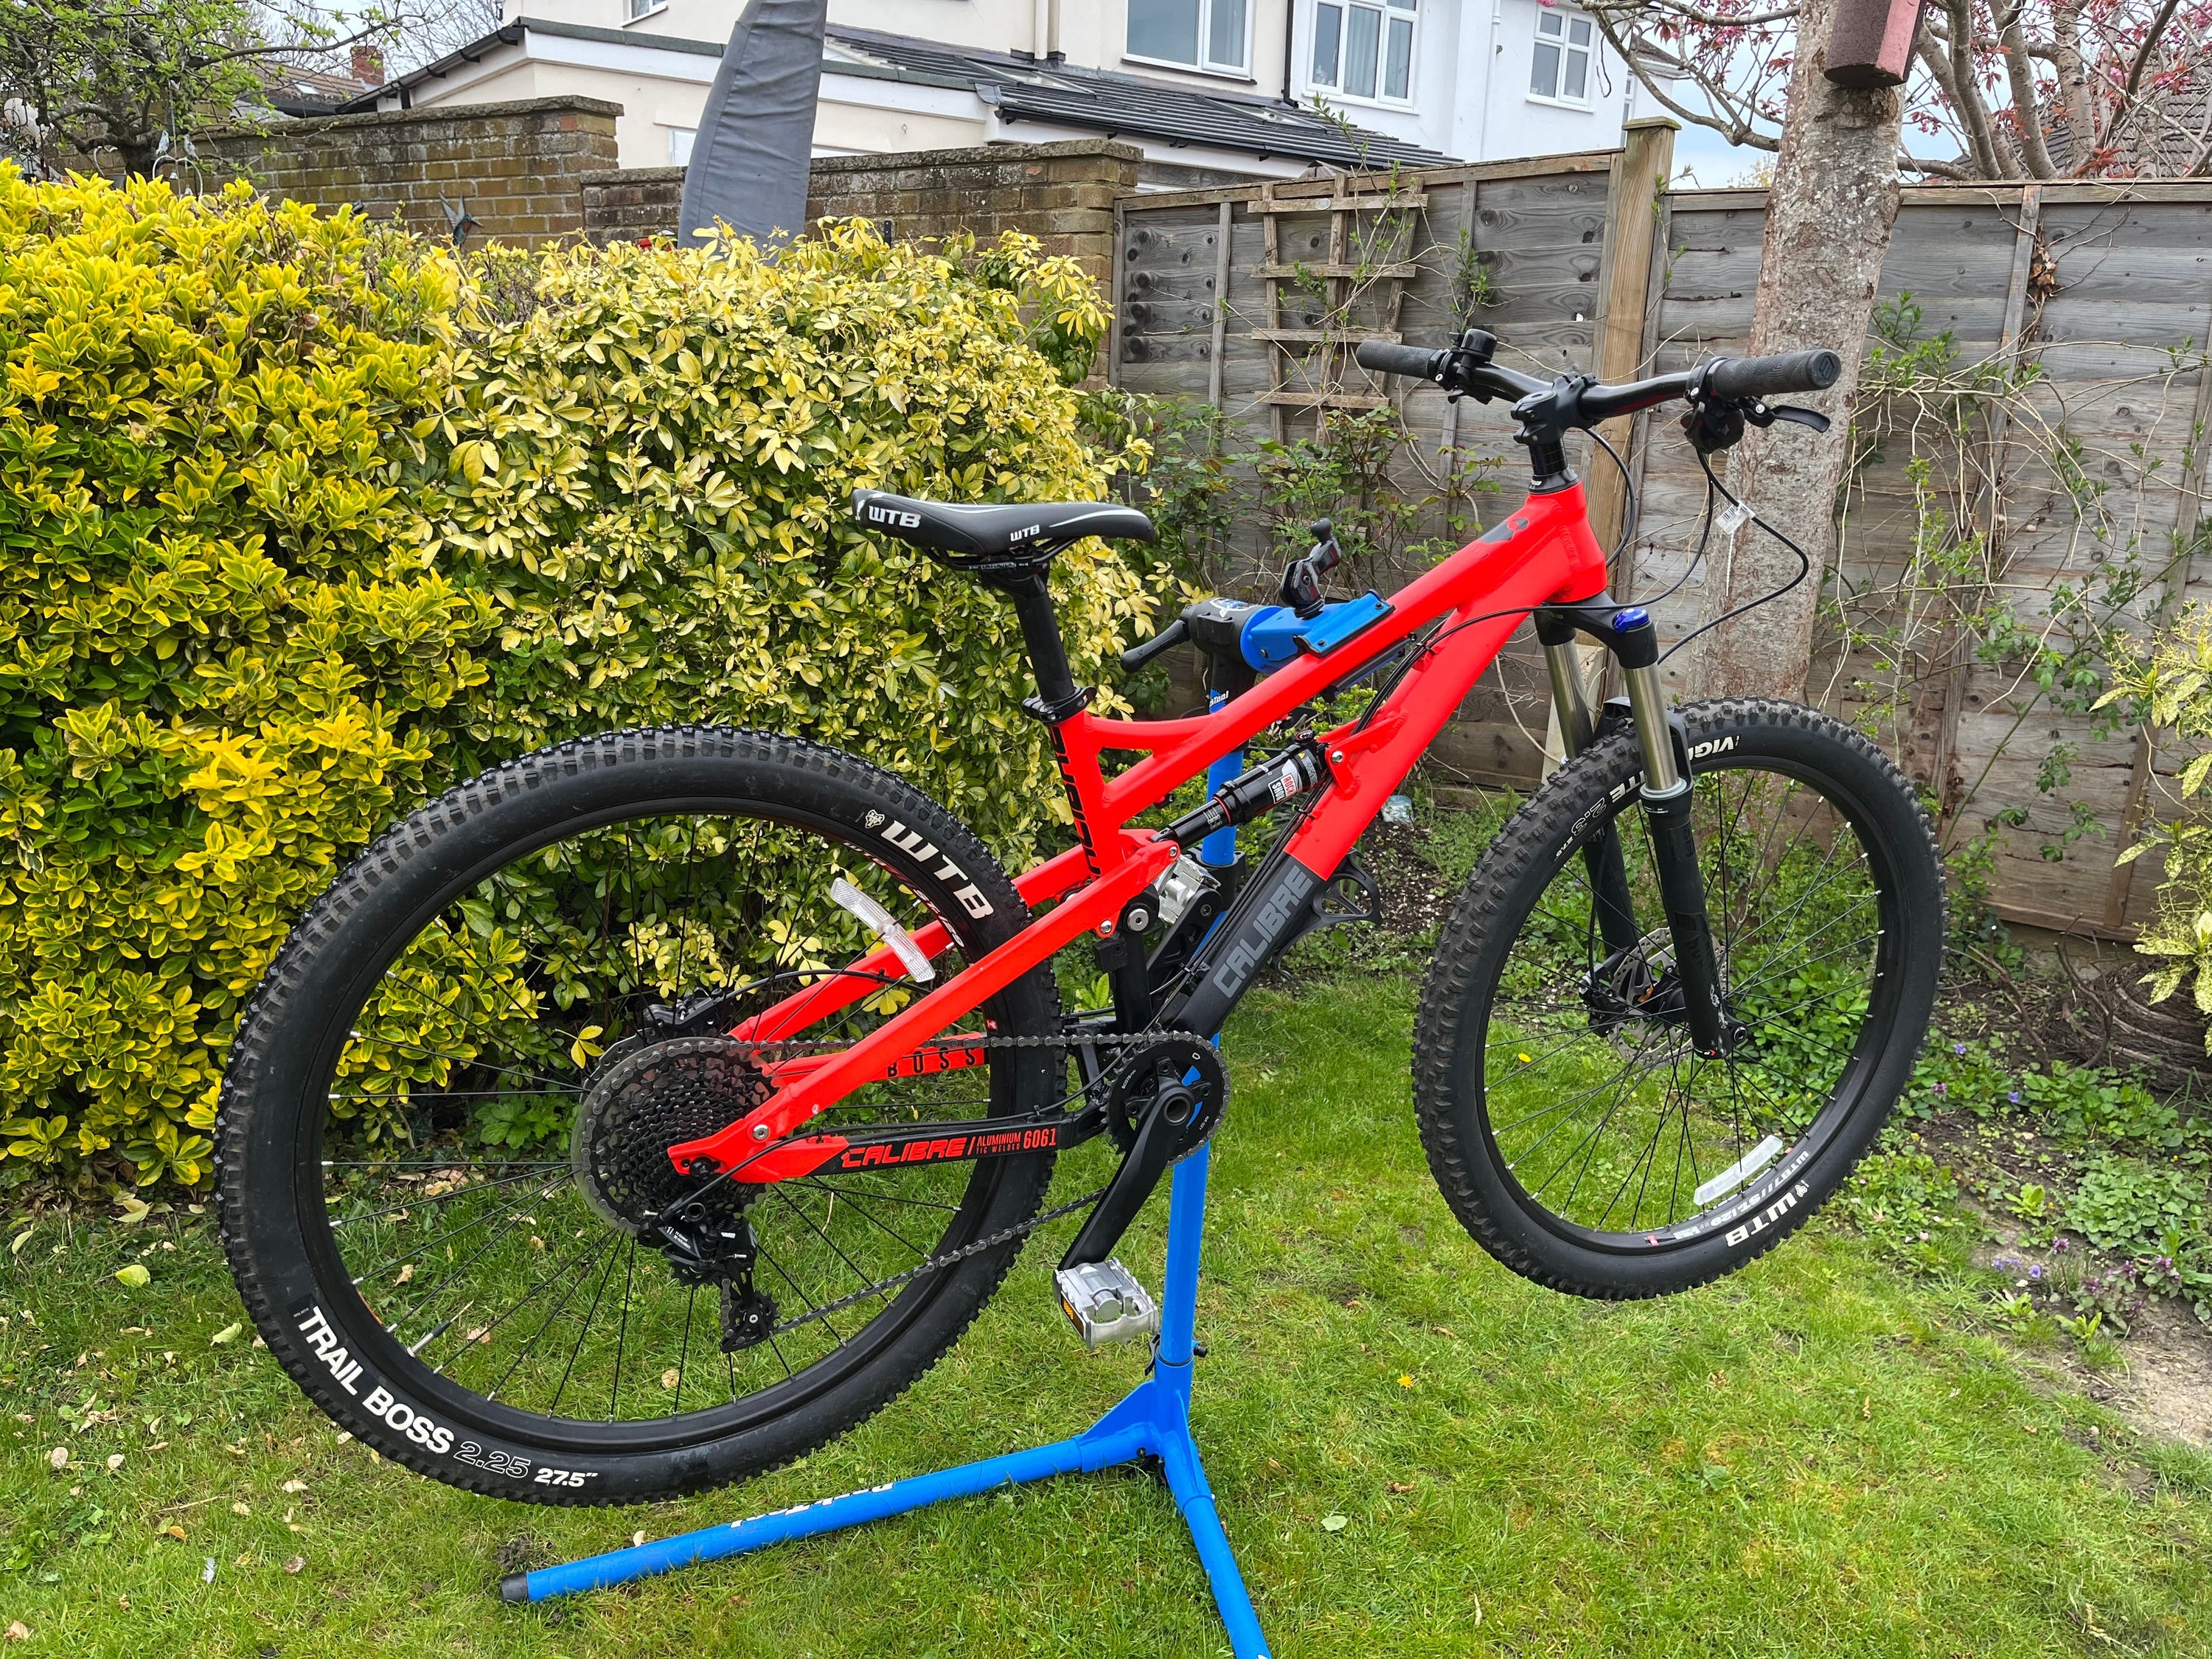 <span style="background-color:rgb(246,247,248);color:rgb(28,30,33);"> Calibre Bossnut 2017 Mountain bike </span>